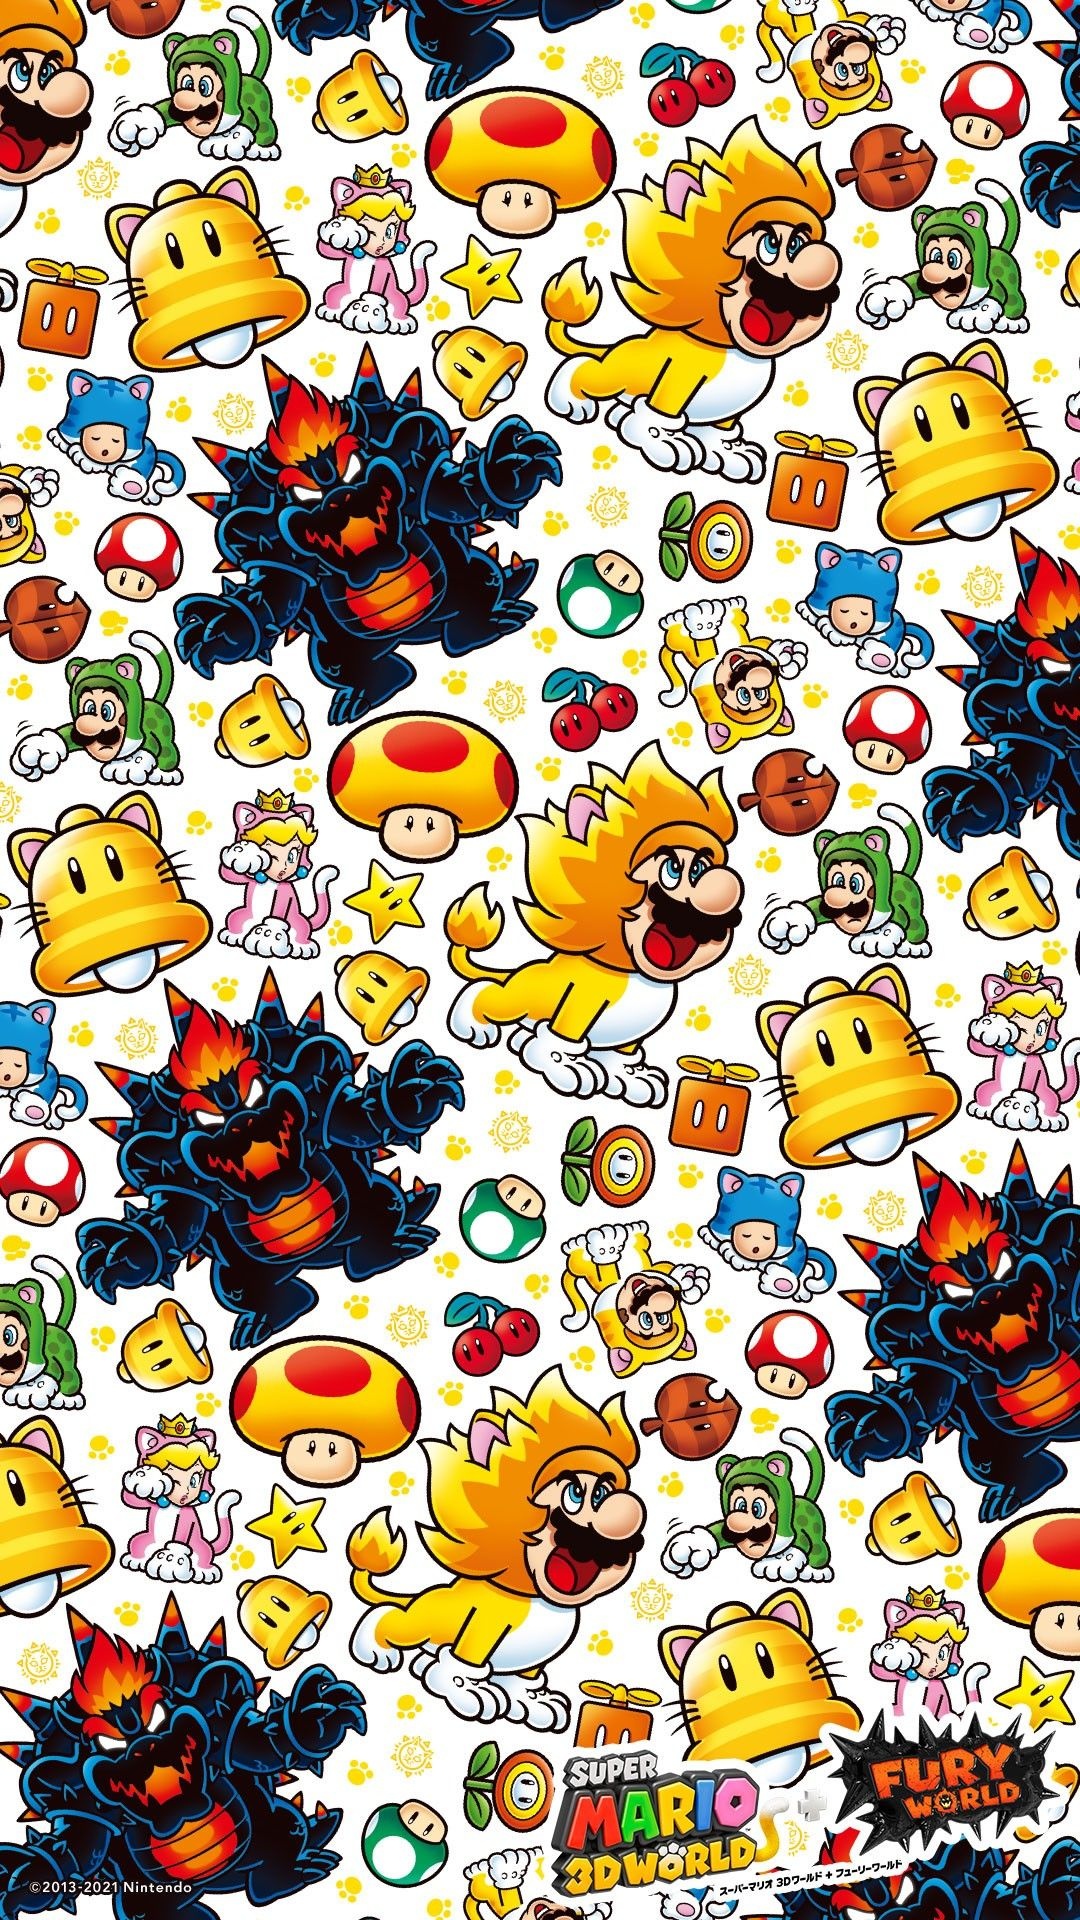 Super Mario, Bowsers Fury, Fun-filled adventure, Gaming excitement, 1080x1920 Full HD Phone